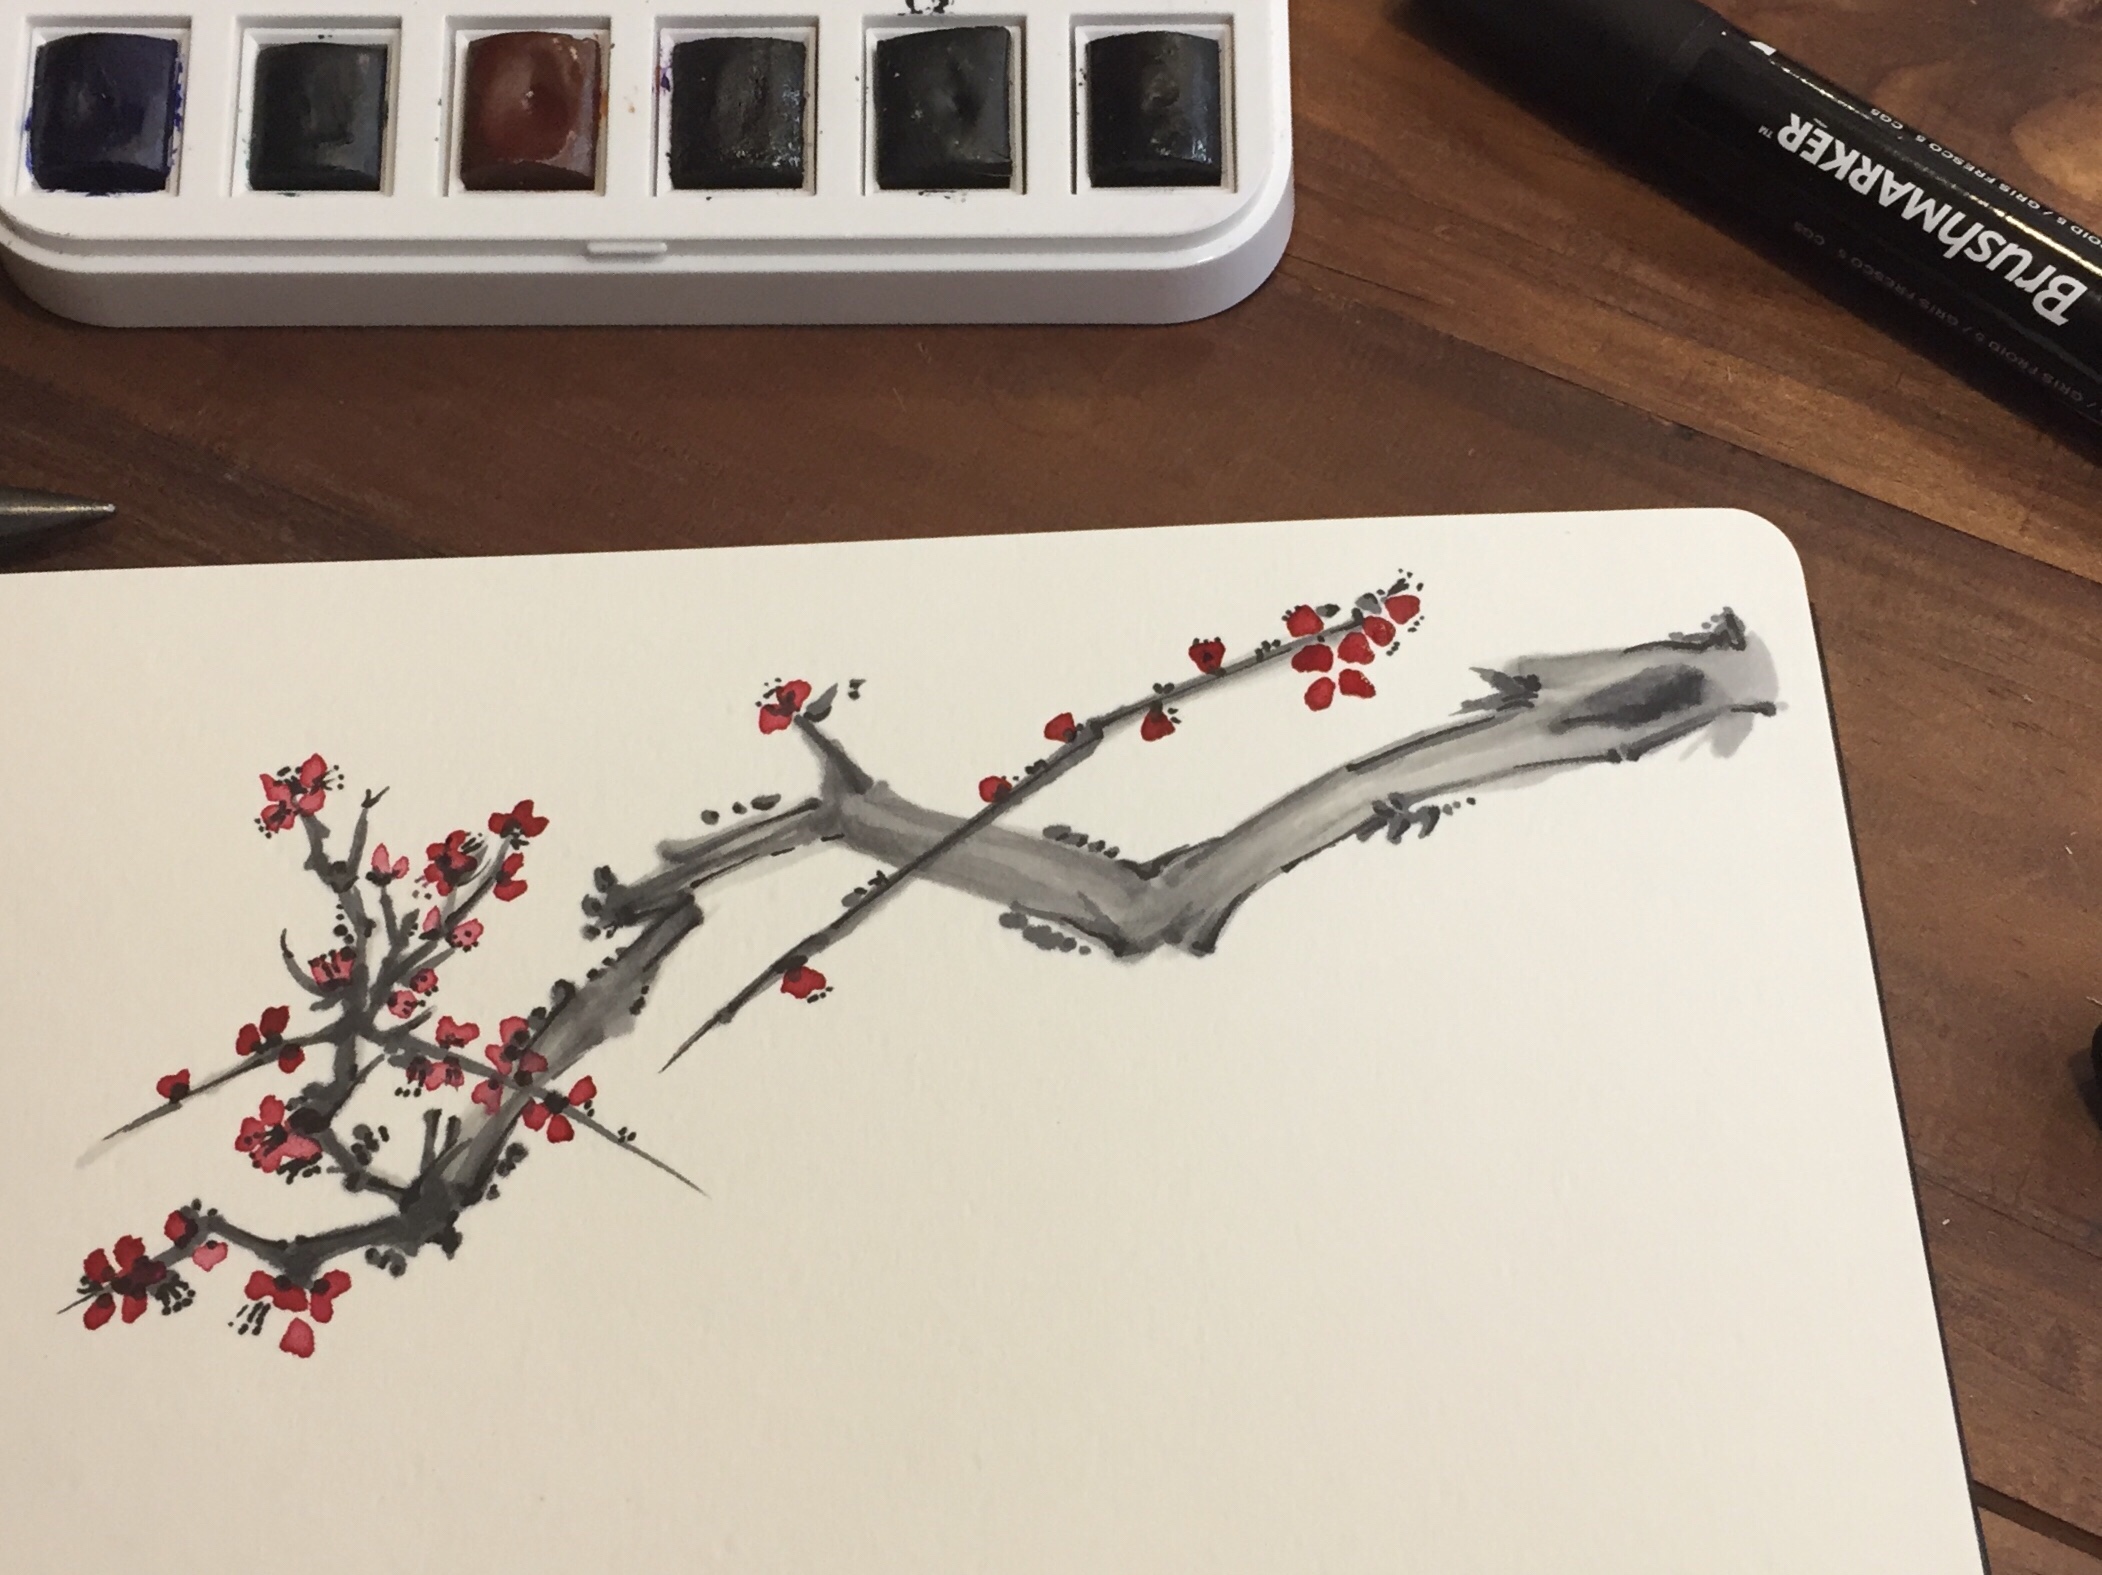 Branch of a blooming tree, to which I added a few black spots. The artwork is on a wide drawing book on a table, next to pens and paint.